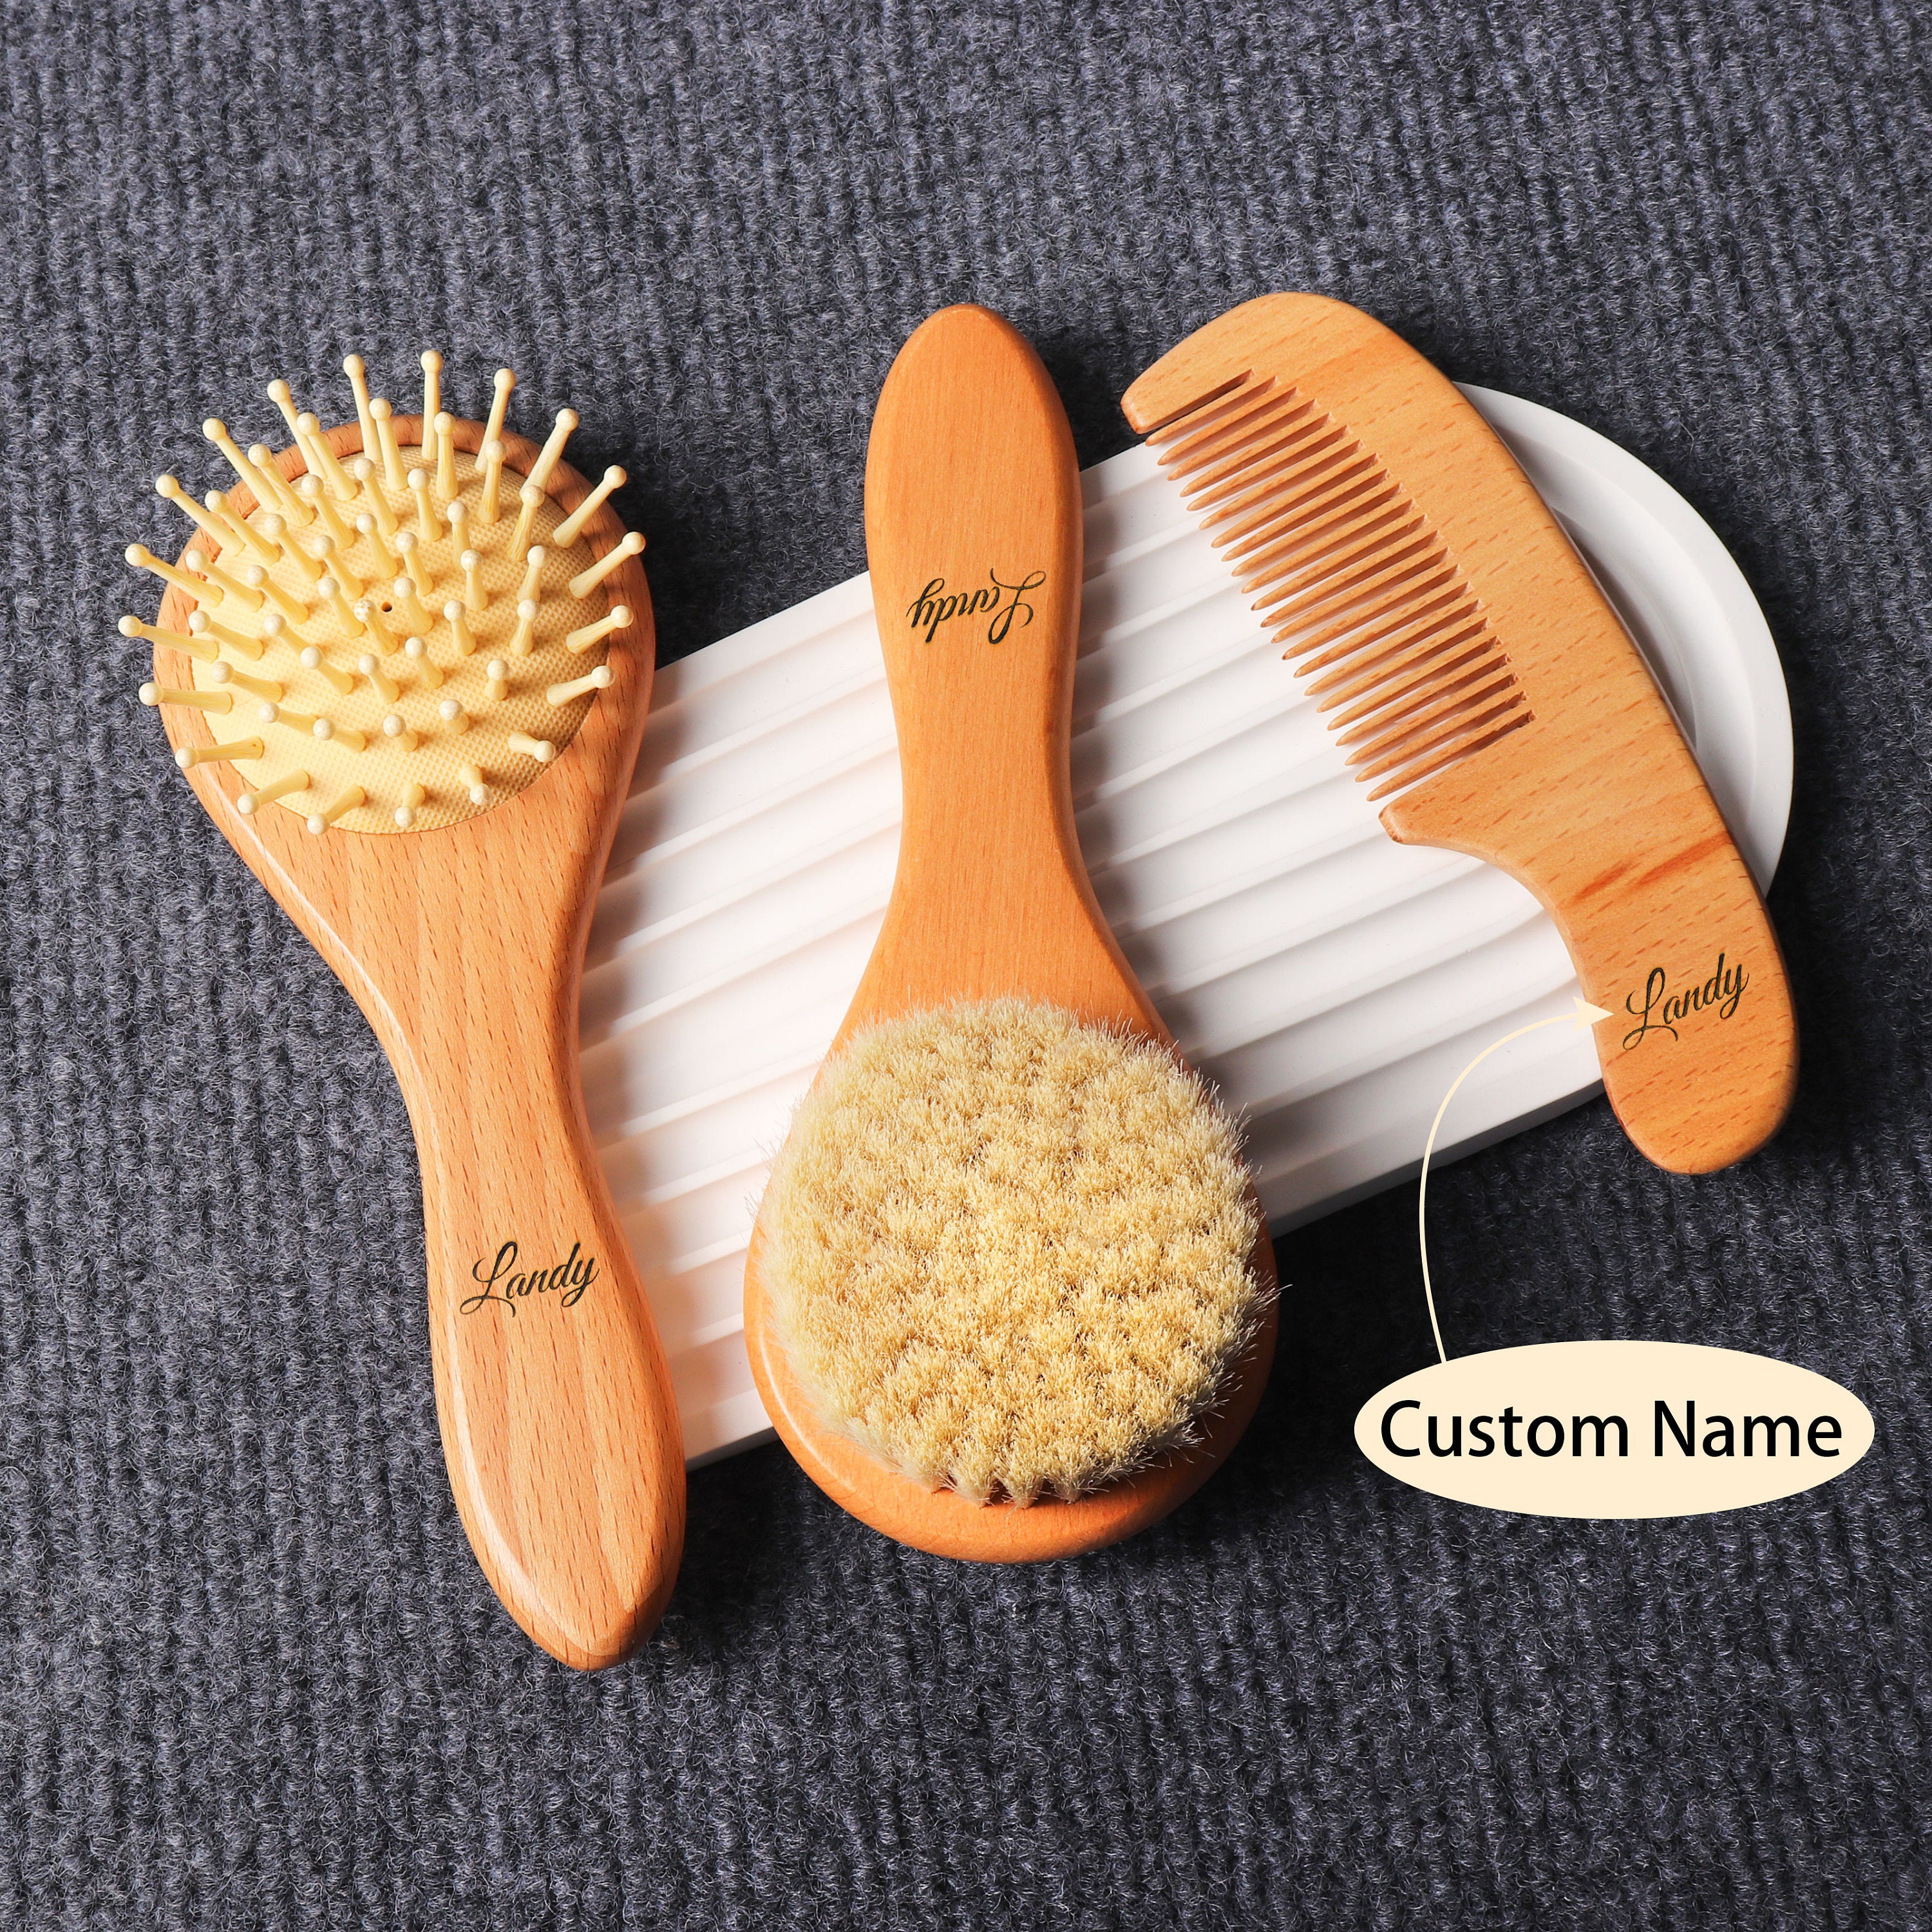 Small Soft Pearwood and Goat Hair Baby Hairbrush - The Foundry Home Goods